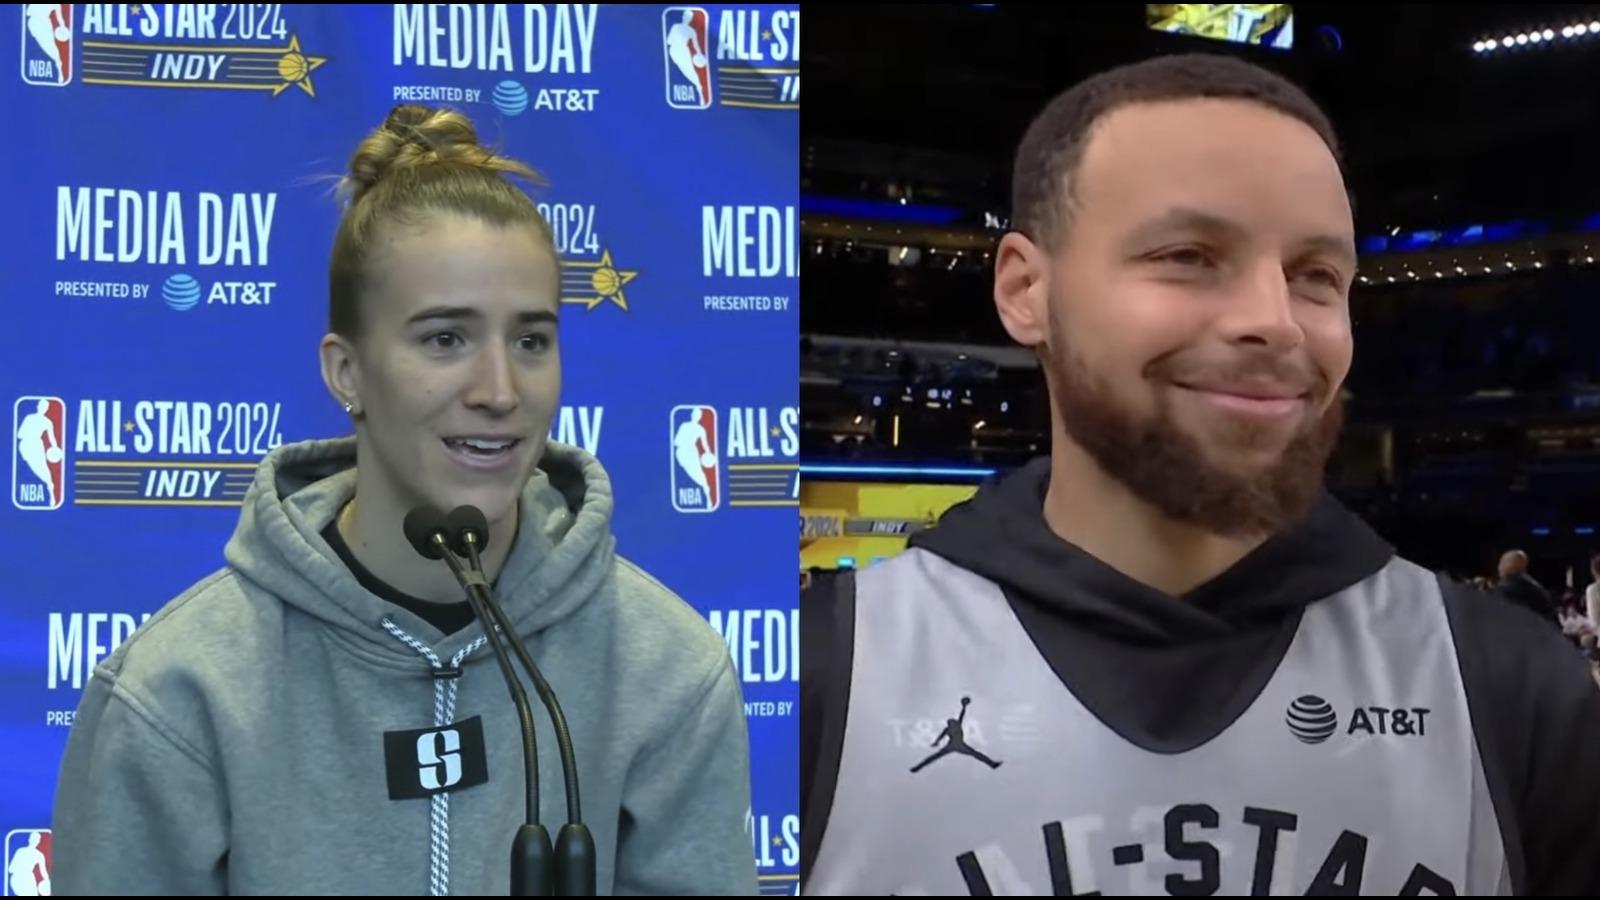 Stephen Curry and Sabrina Ionescu will square off at NBA All-Star Weekend and players are leaning toward Ionescu